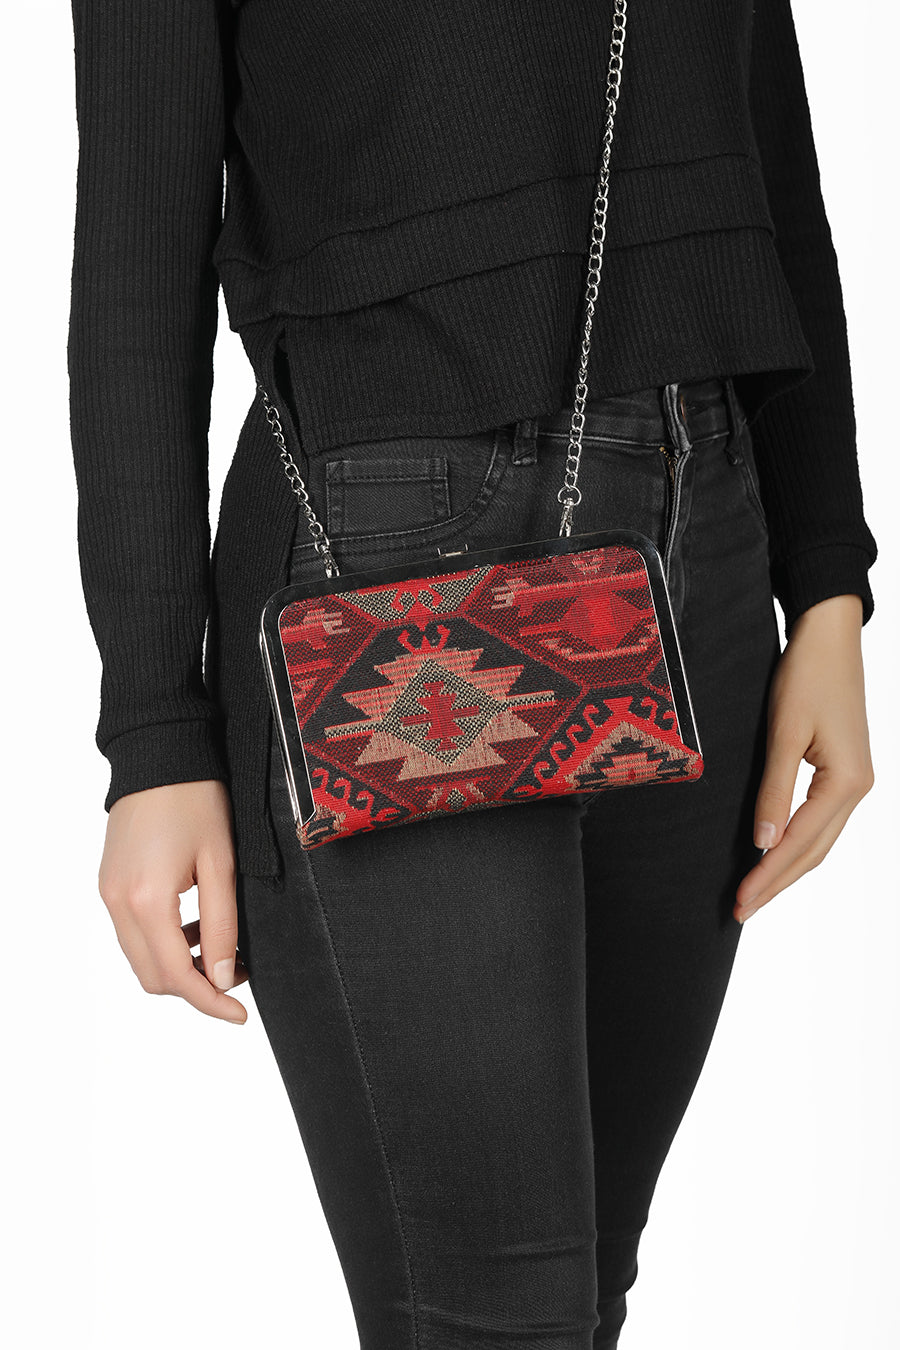 Embroidered Clutch by Nazan